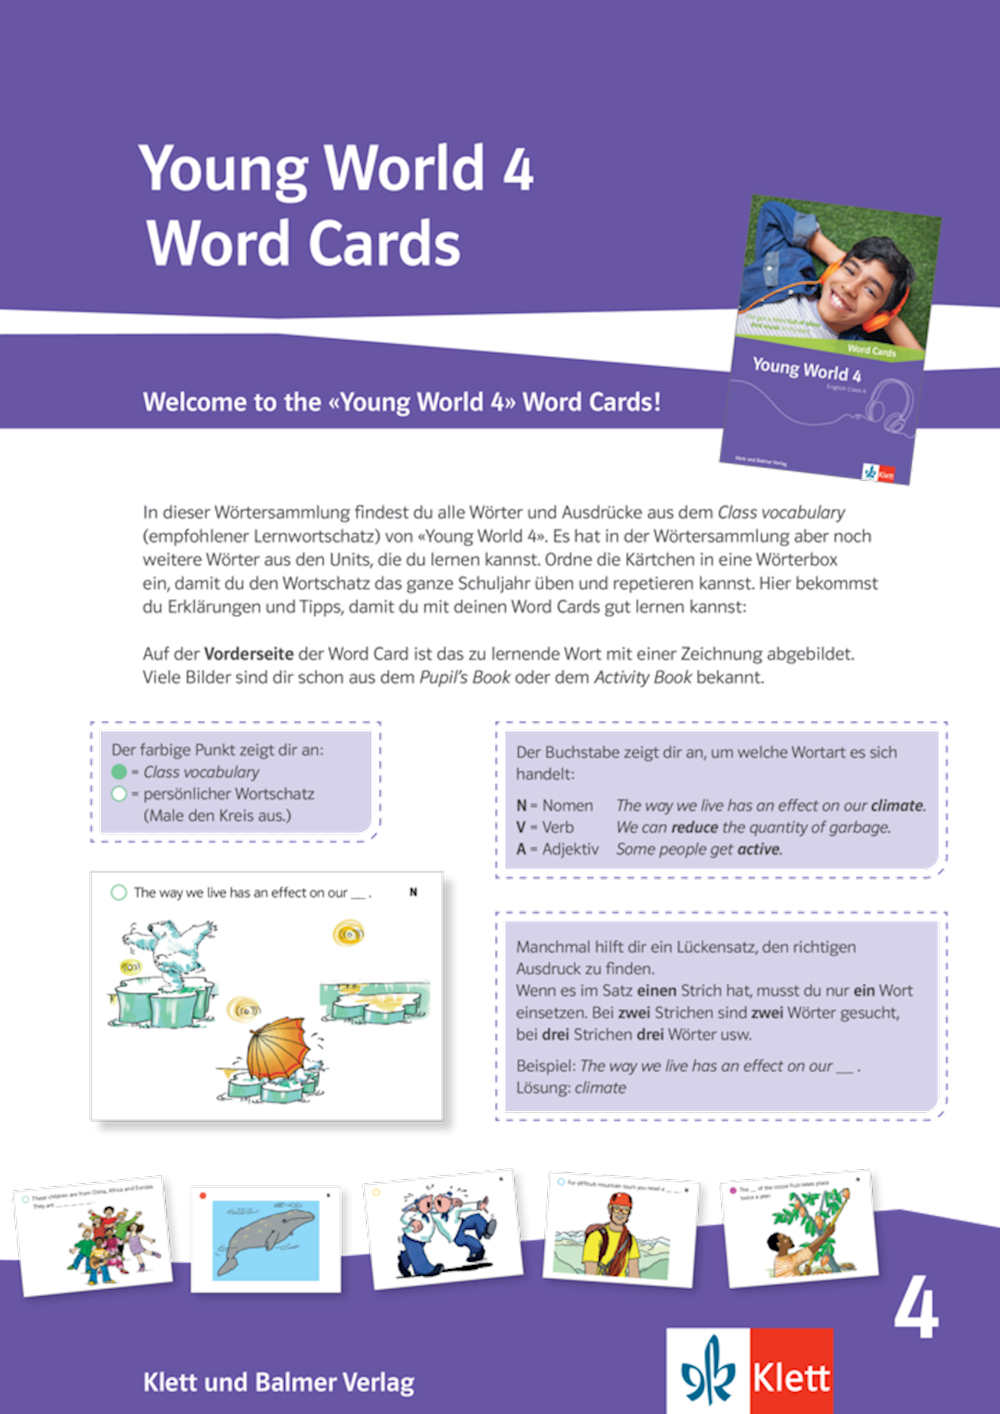 Young World 4 Word Cards